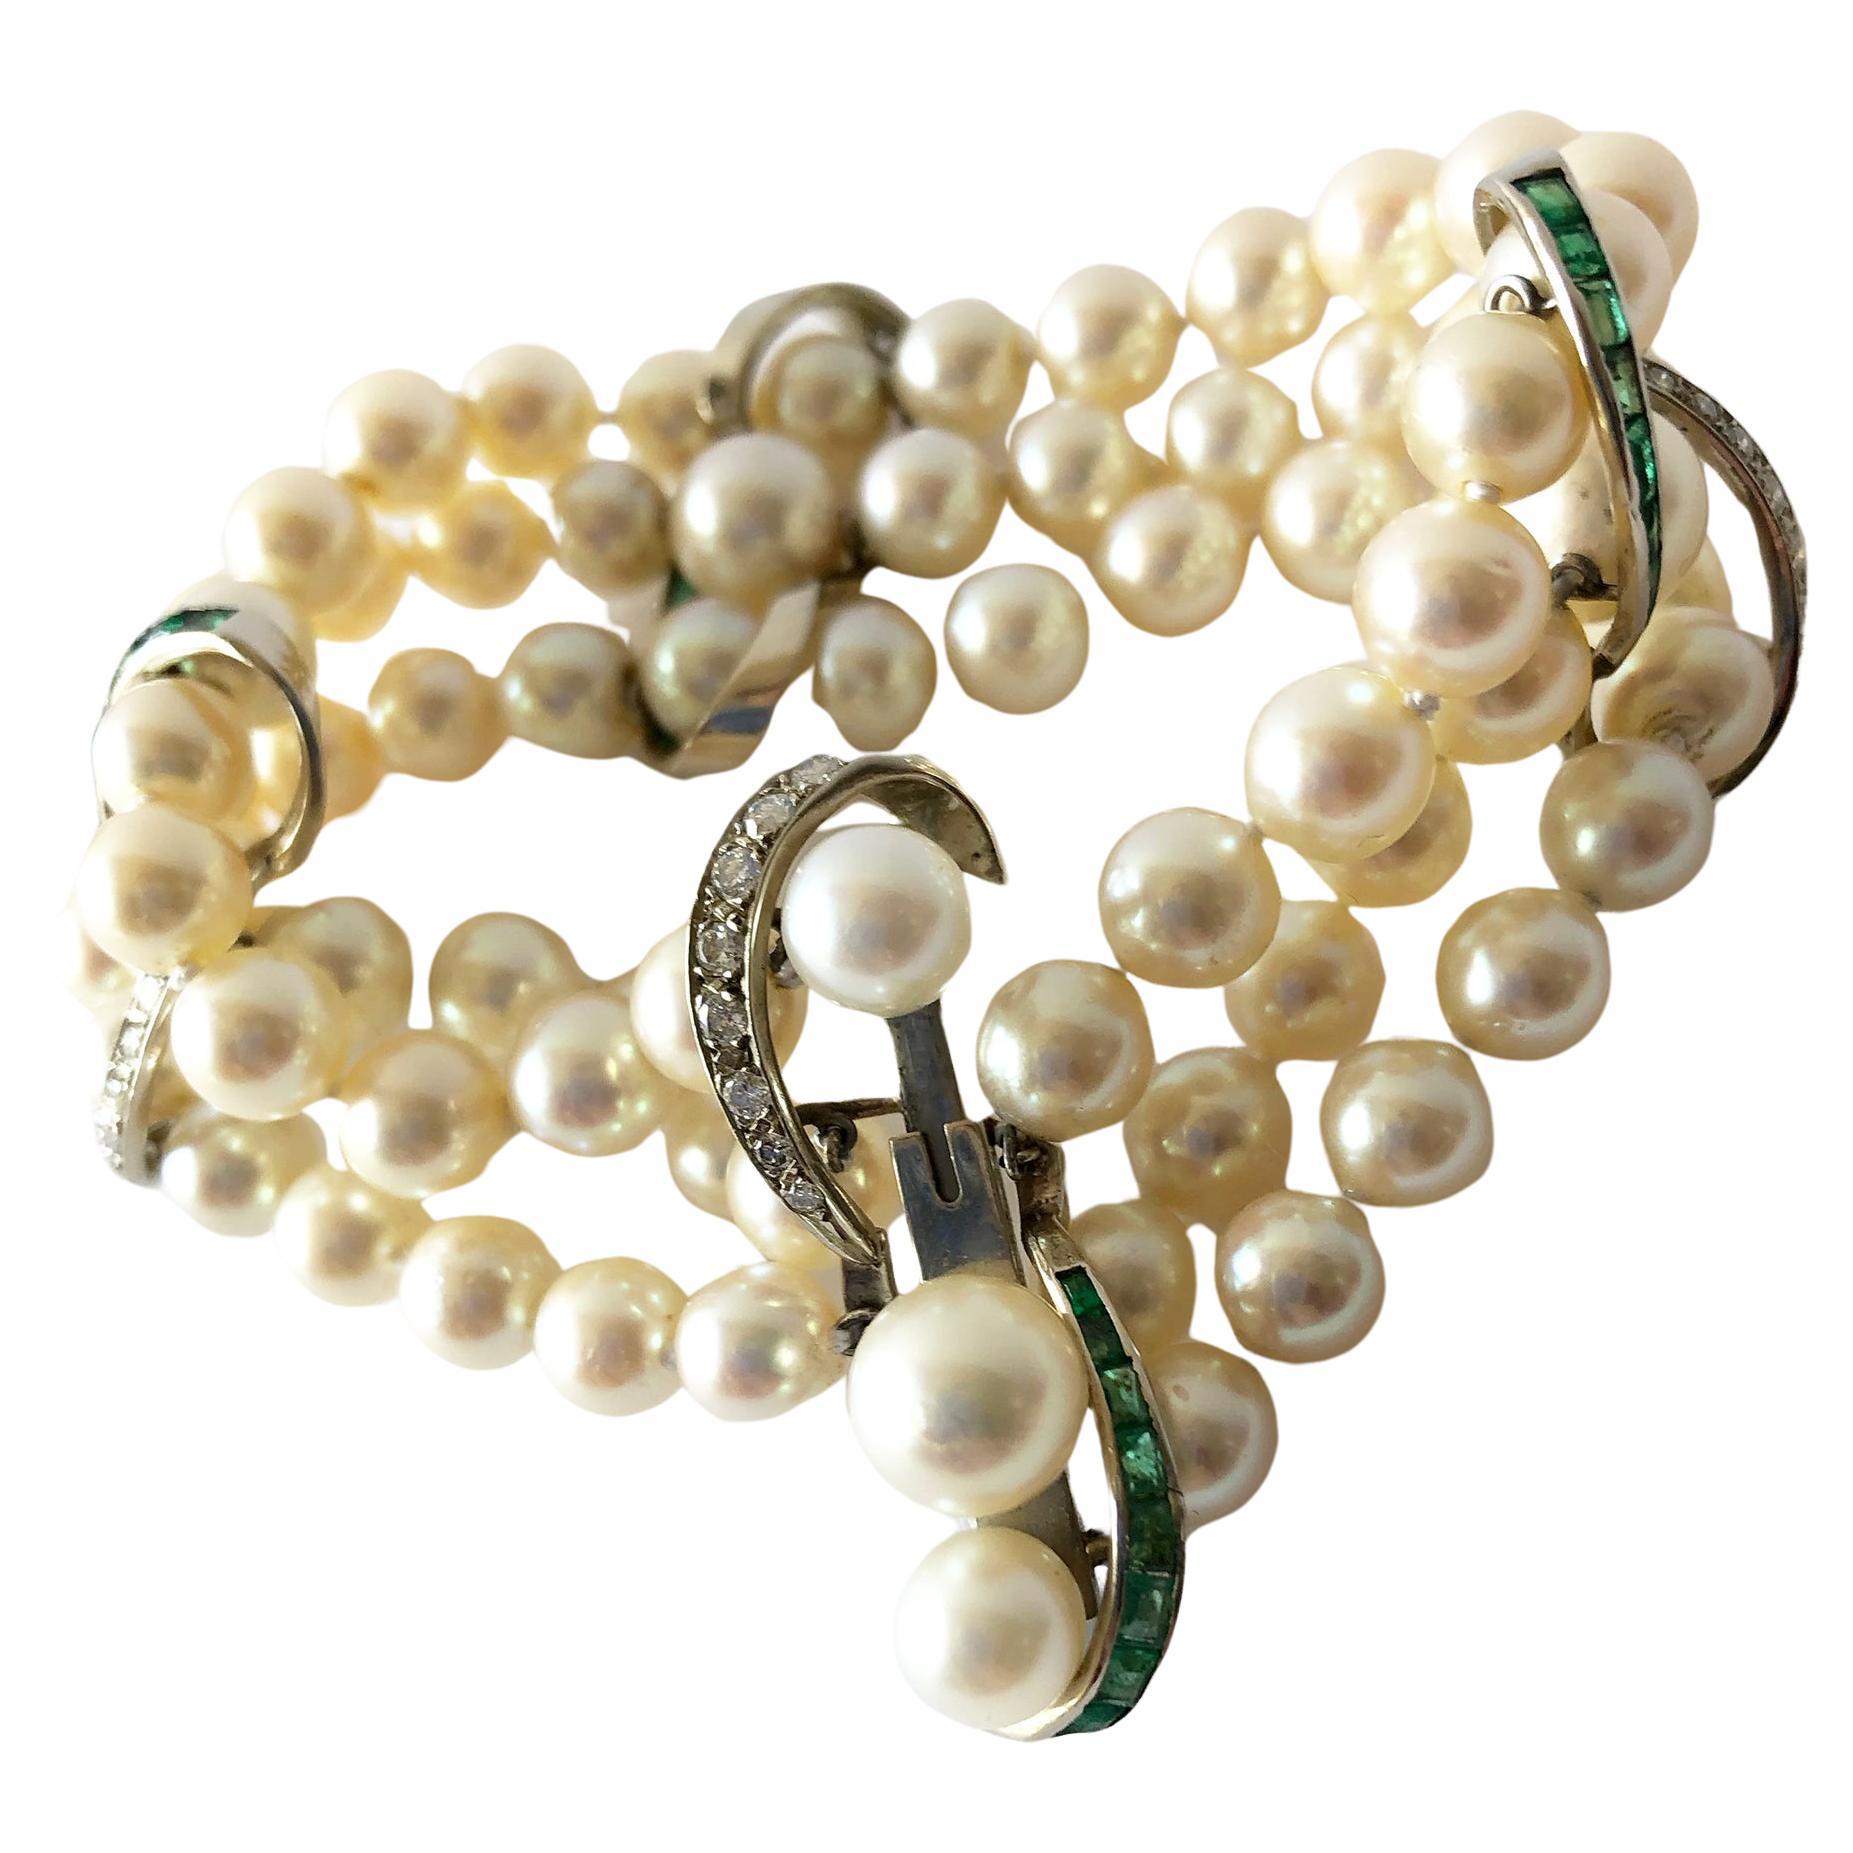 Luxurious three strand pearl bracelet with 14k white gold accents containing channel set emeralds and diamonds.  Emeralds do have natural inclusions and perhaps a small chip or two. These are very hard to see with the naked eye and mostly only under